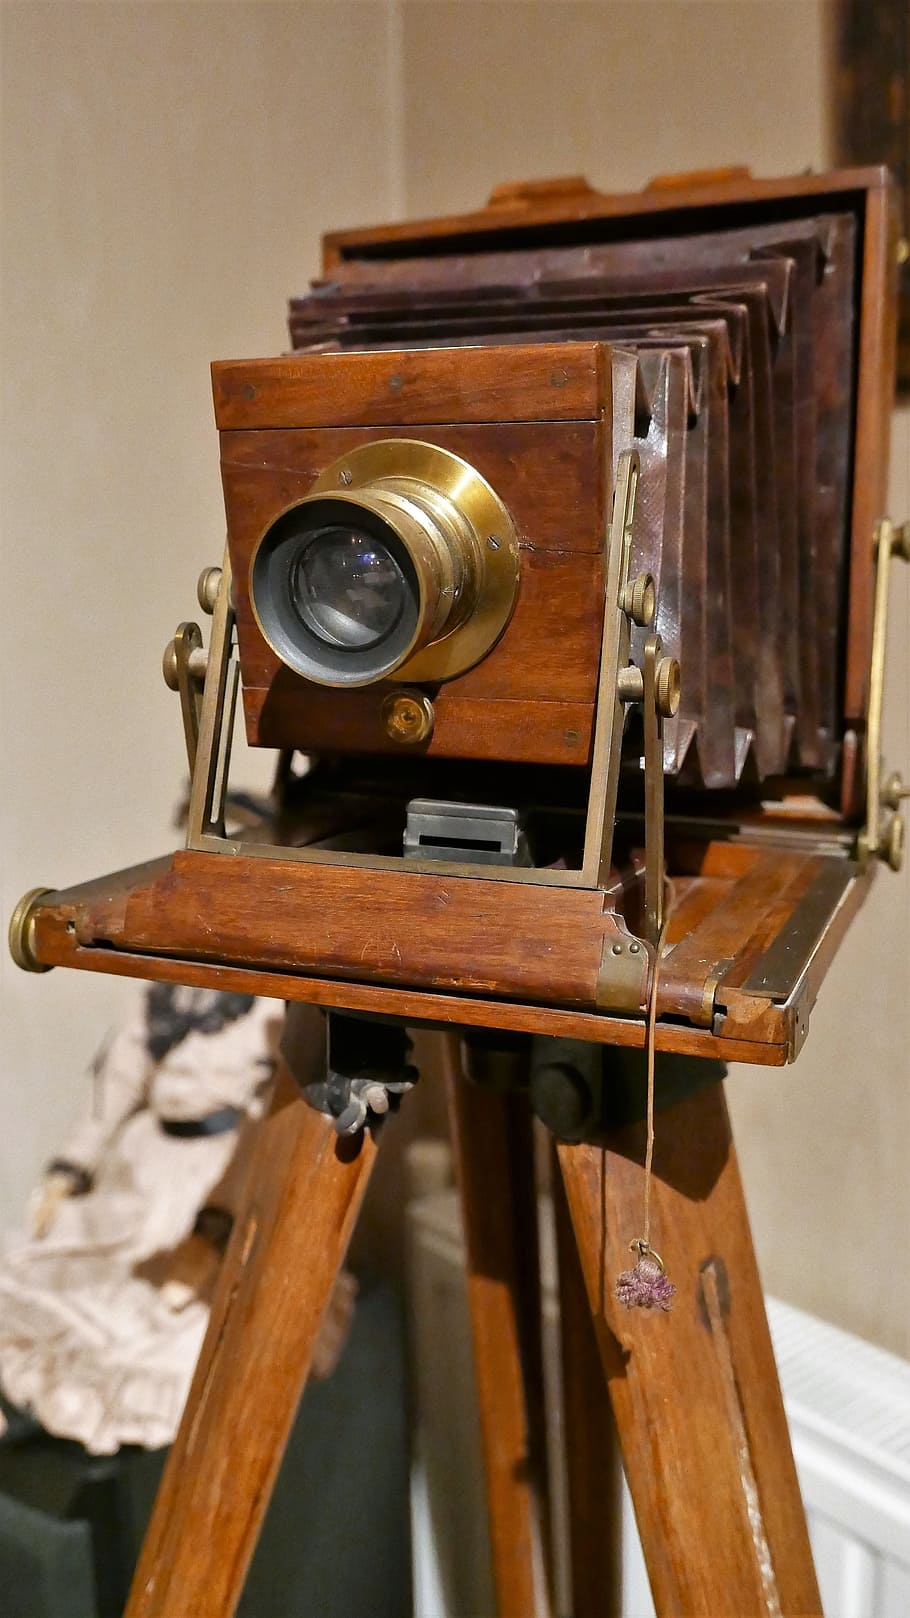 photo camera, antique, old, camera, shooting, photography, analog, wood - material, metal, indoors